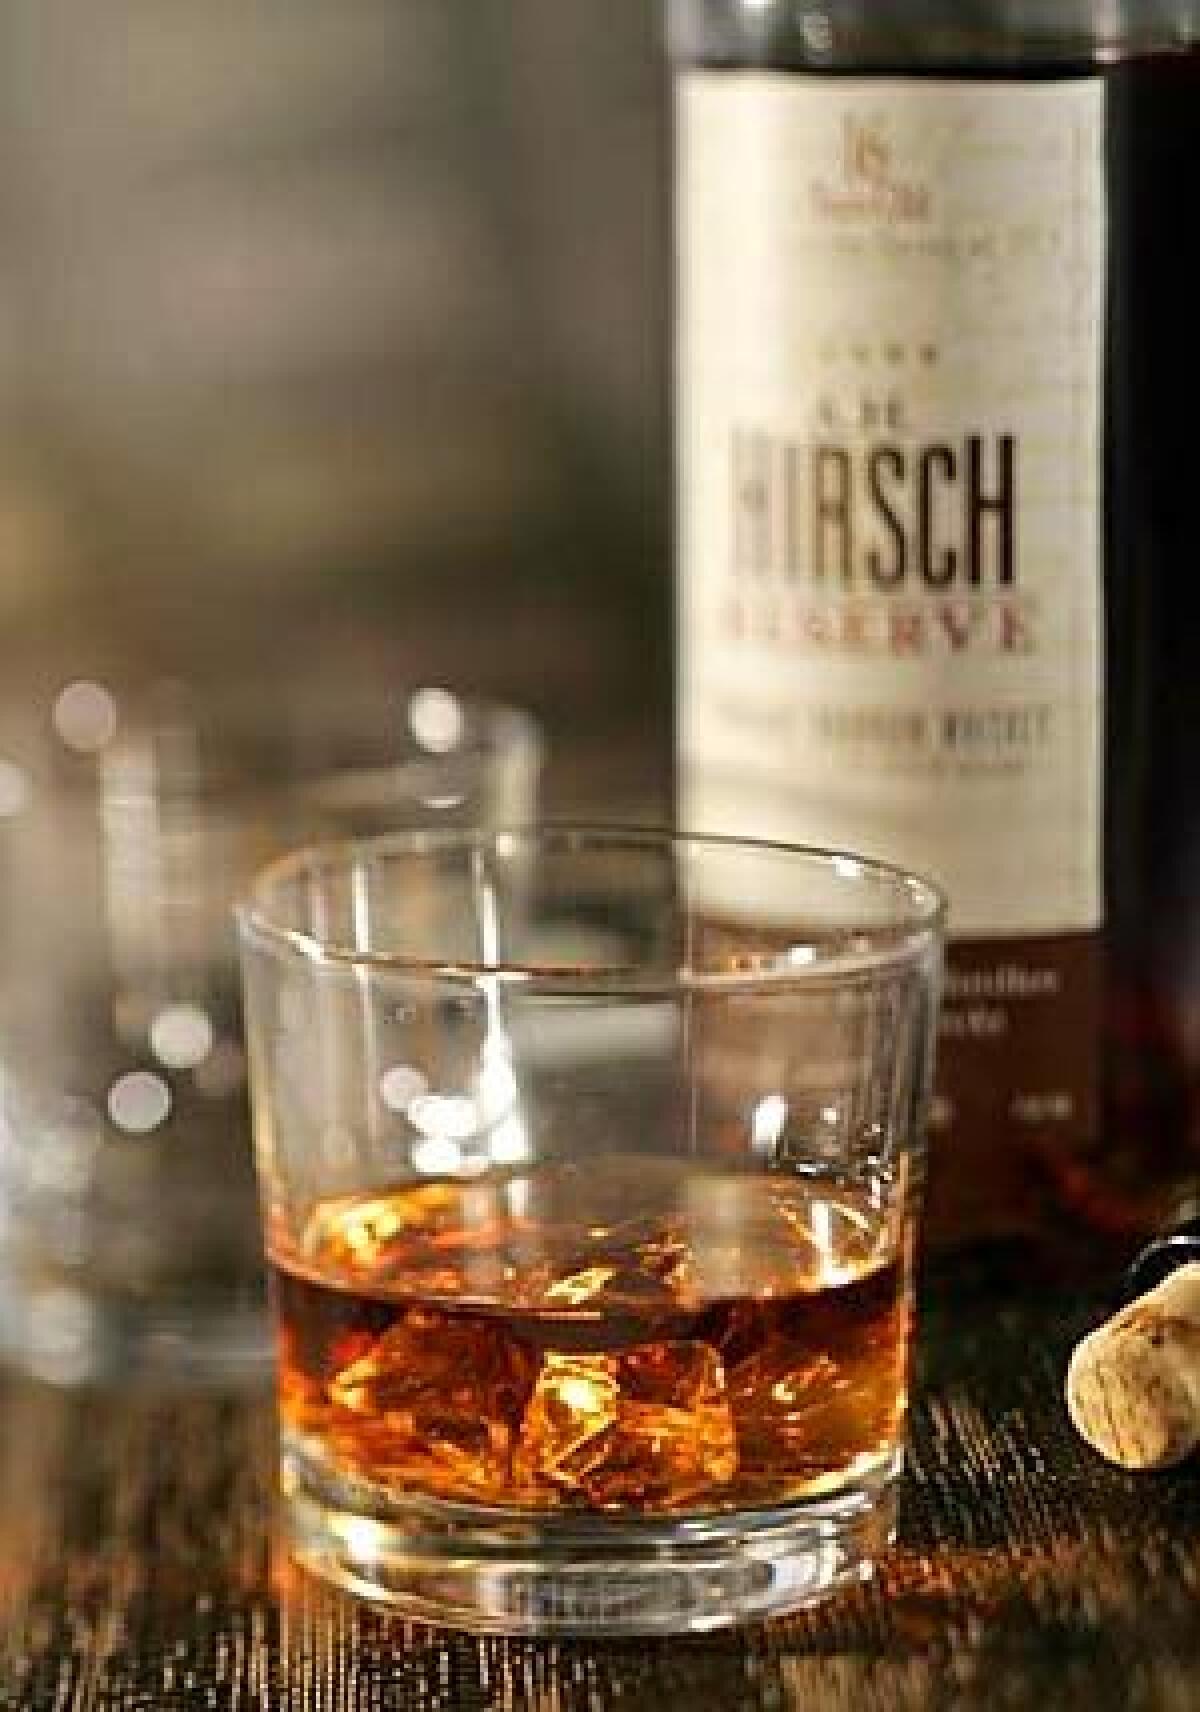 RARE: In the past several years, Americans have caught up with international connoisseurs in appreciating our long-aged bourbons, whose delicacy and complexity compares with Scotch and Cognac.